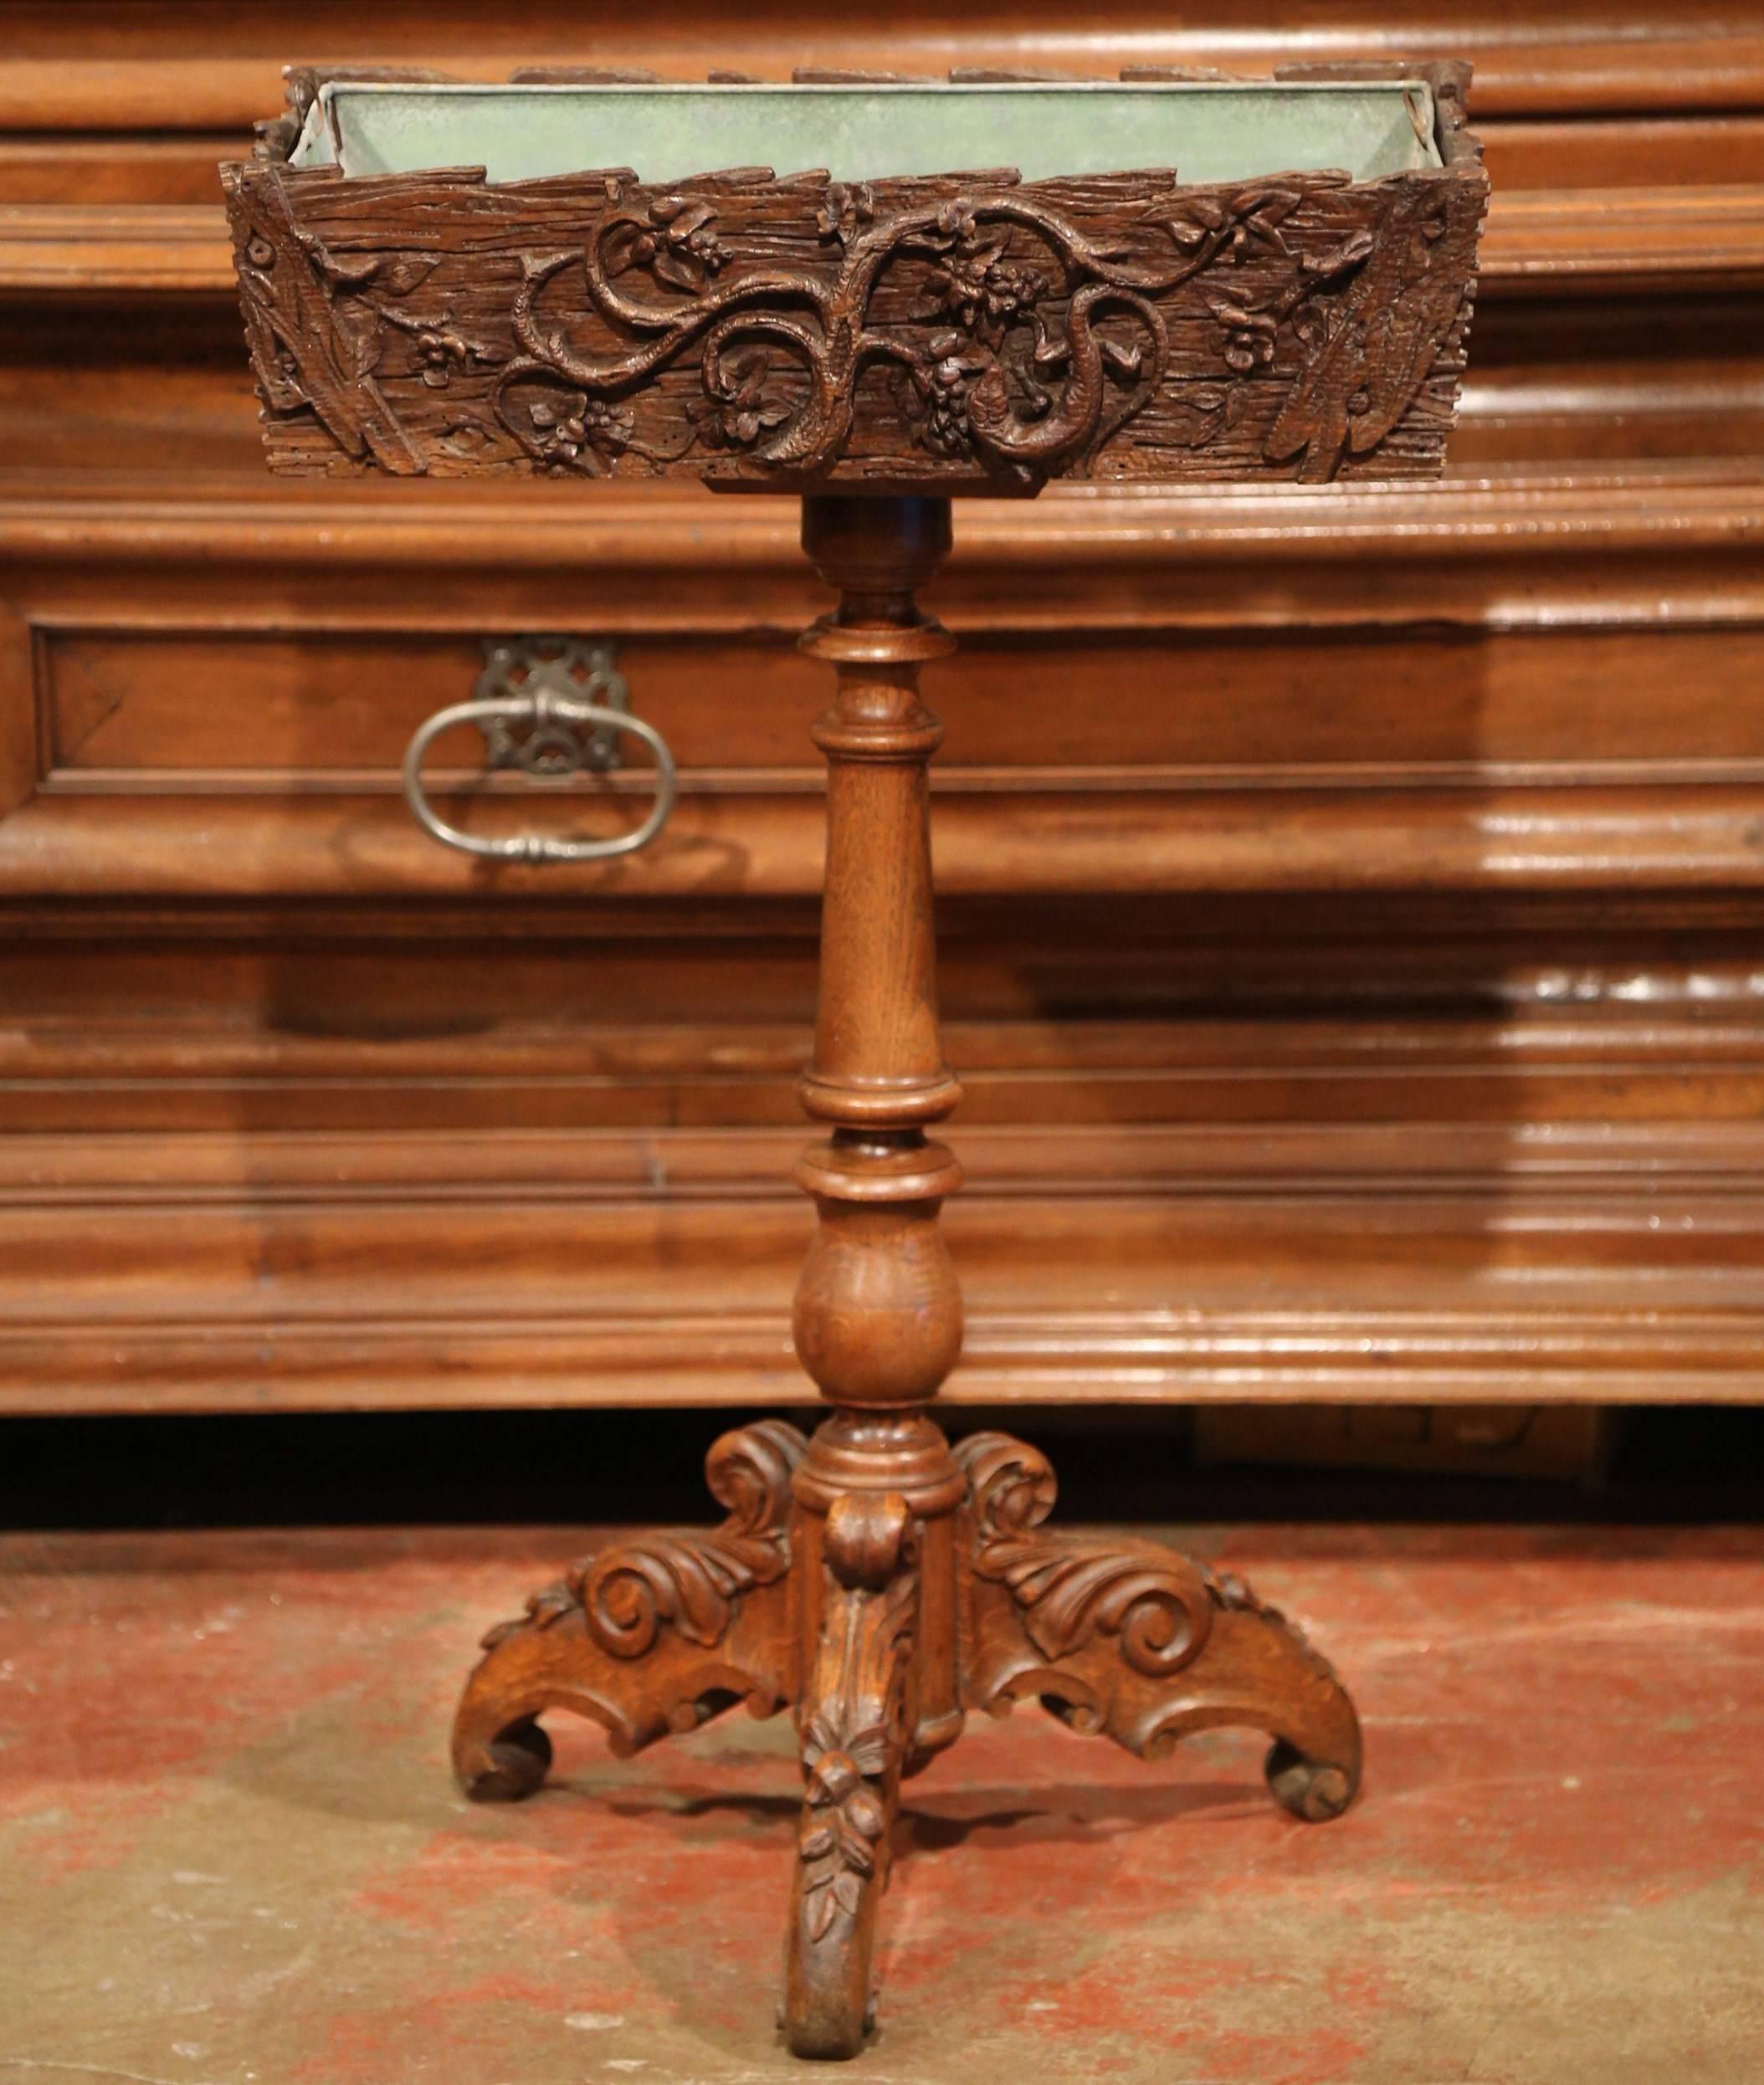 This beautiful, walnut antique Black Forest jardinière was carved in France, circa 1870. The elevated fruitwood planter features hand-carved flowers, tree branches with leaves, and a hand-carved lizard. It has the original removable inside zinc